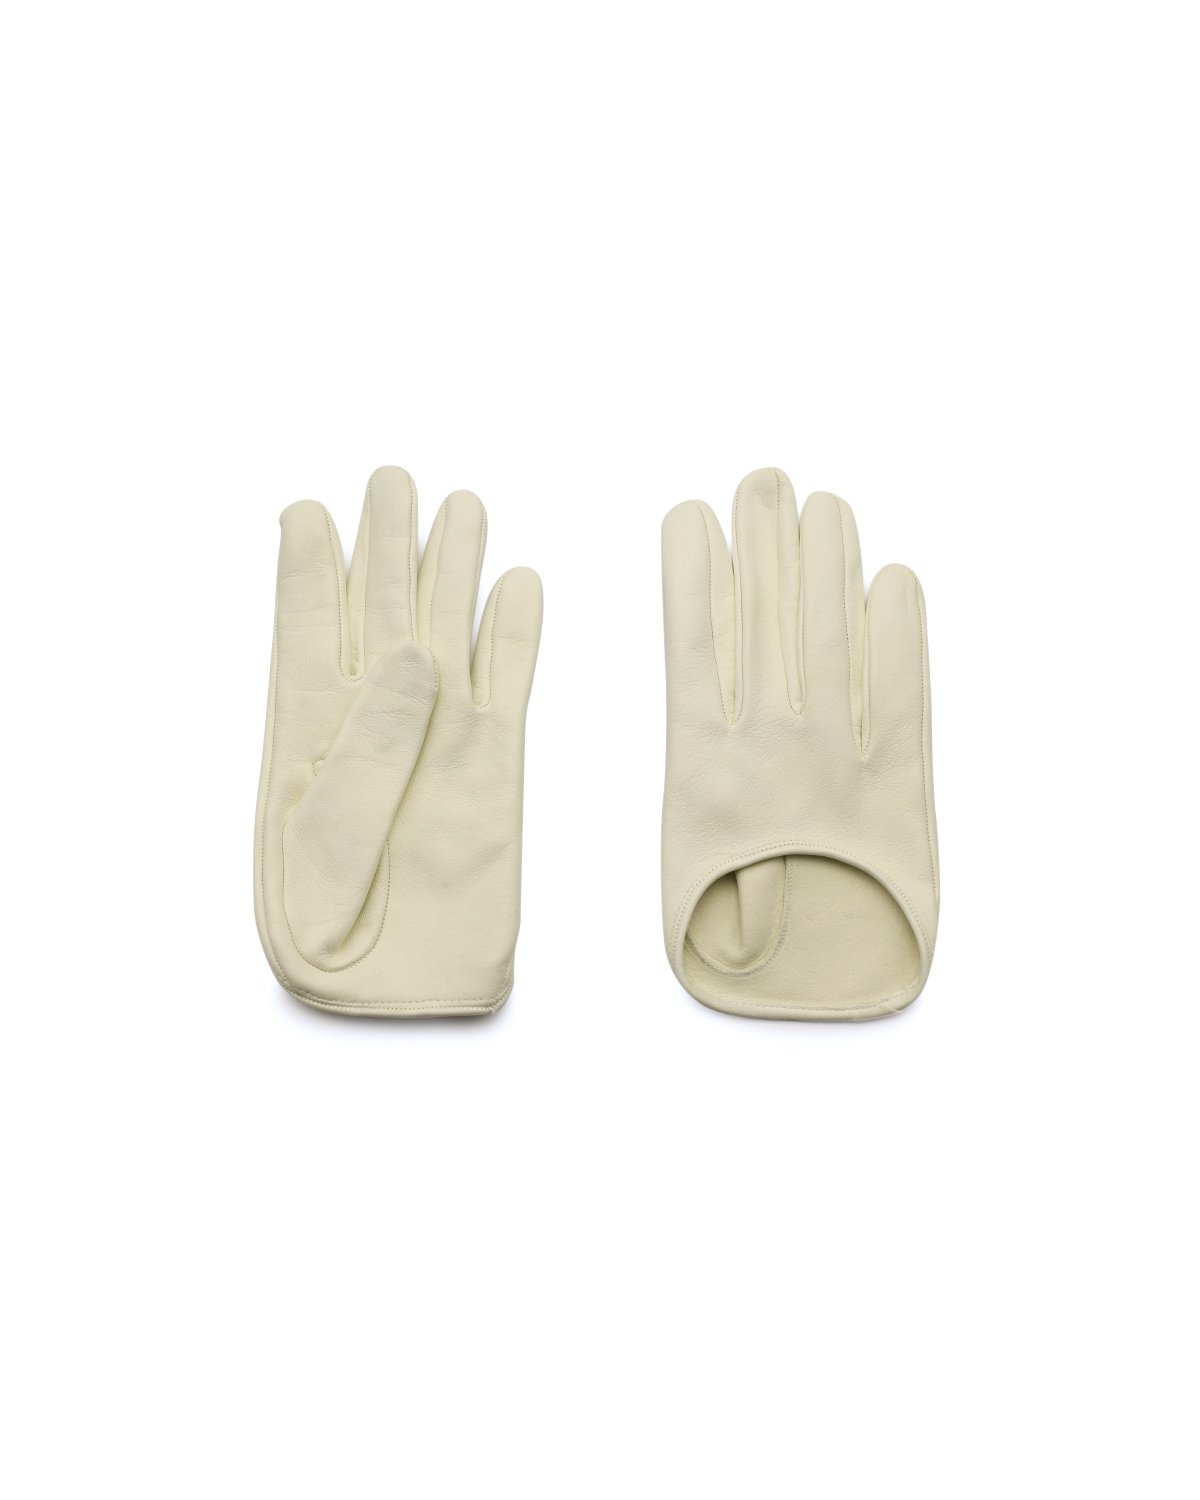 White leather gloves | Accessories, Gloves | Genny